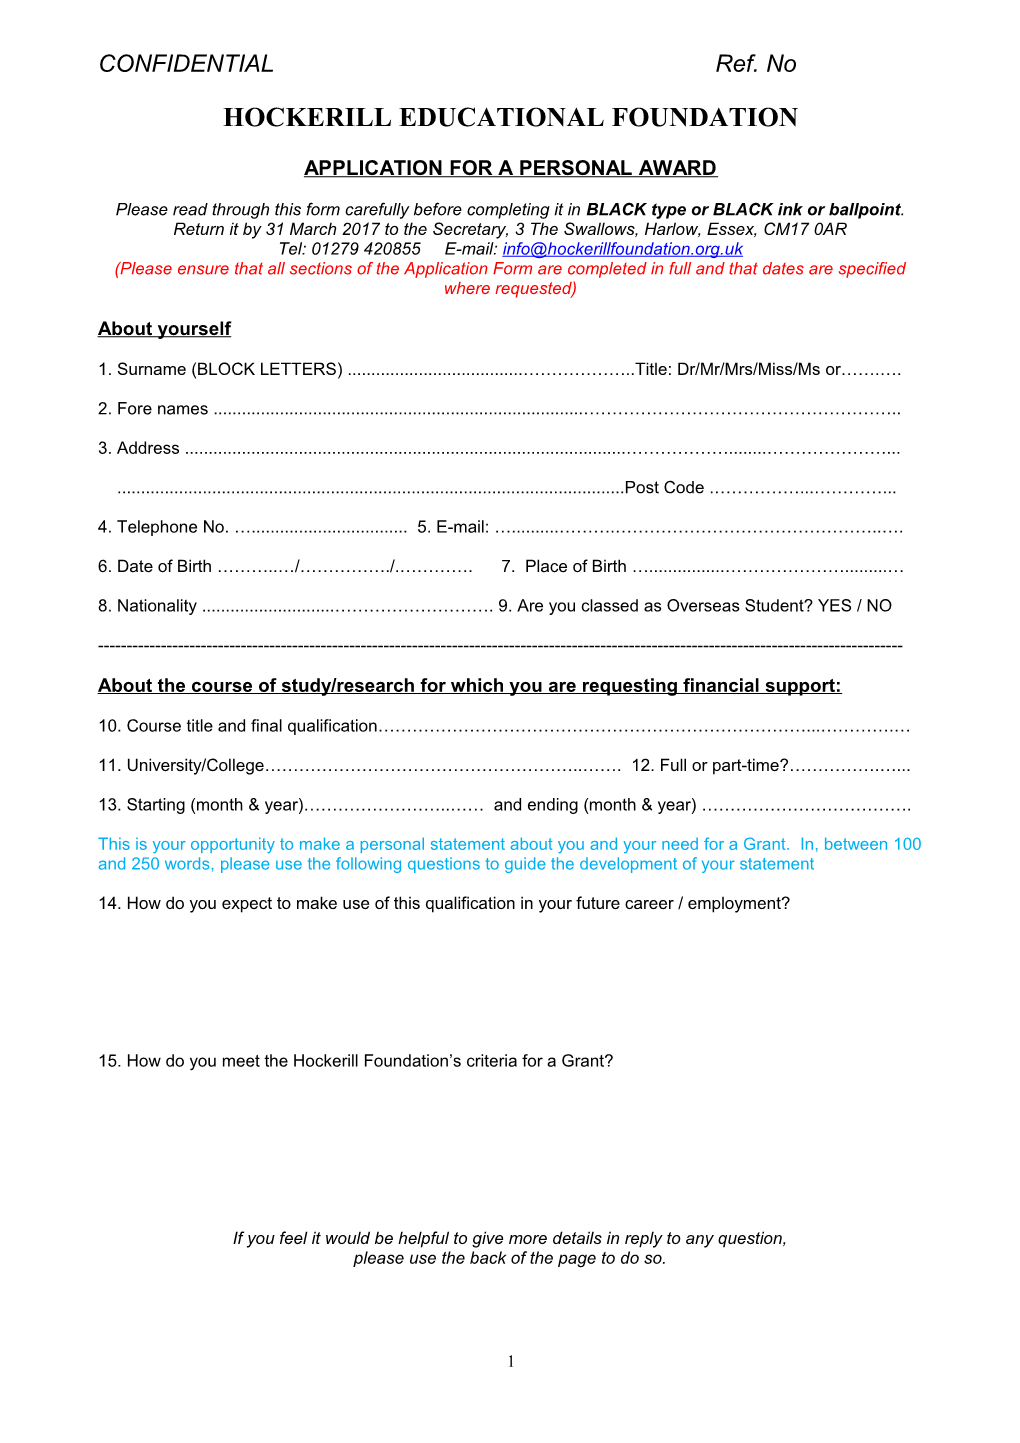 Application for a Personal Award